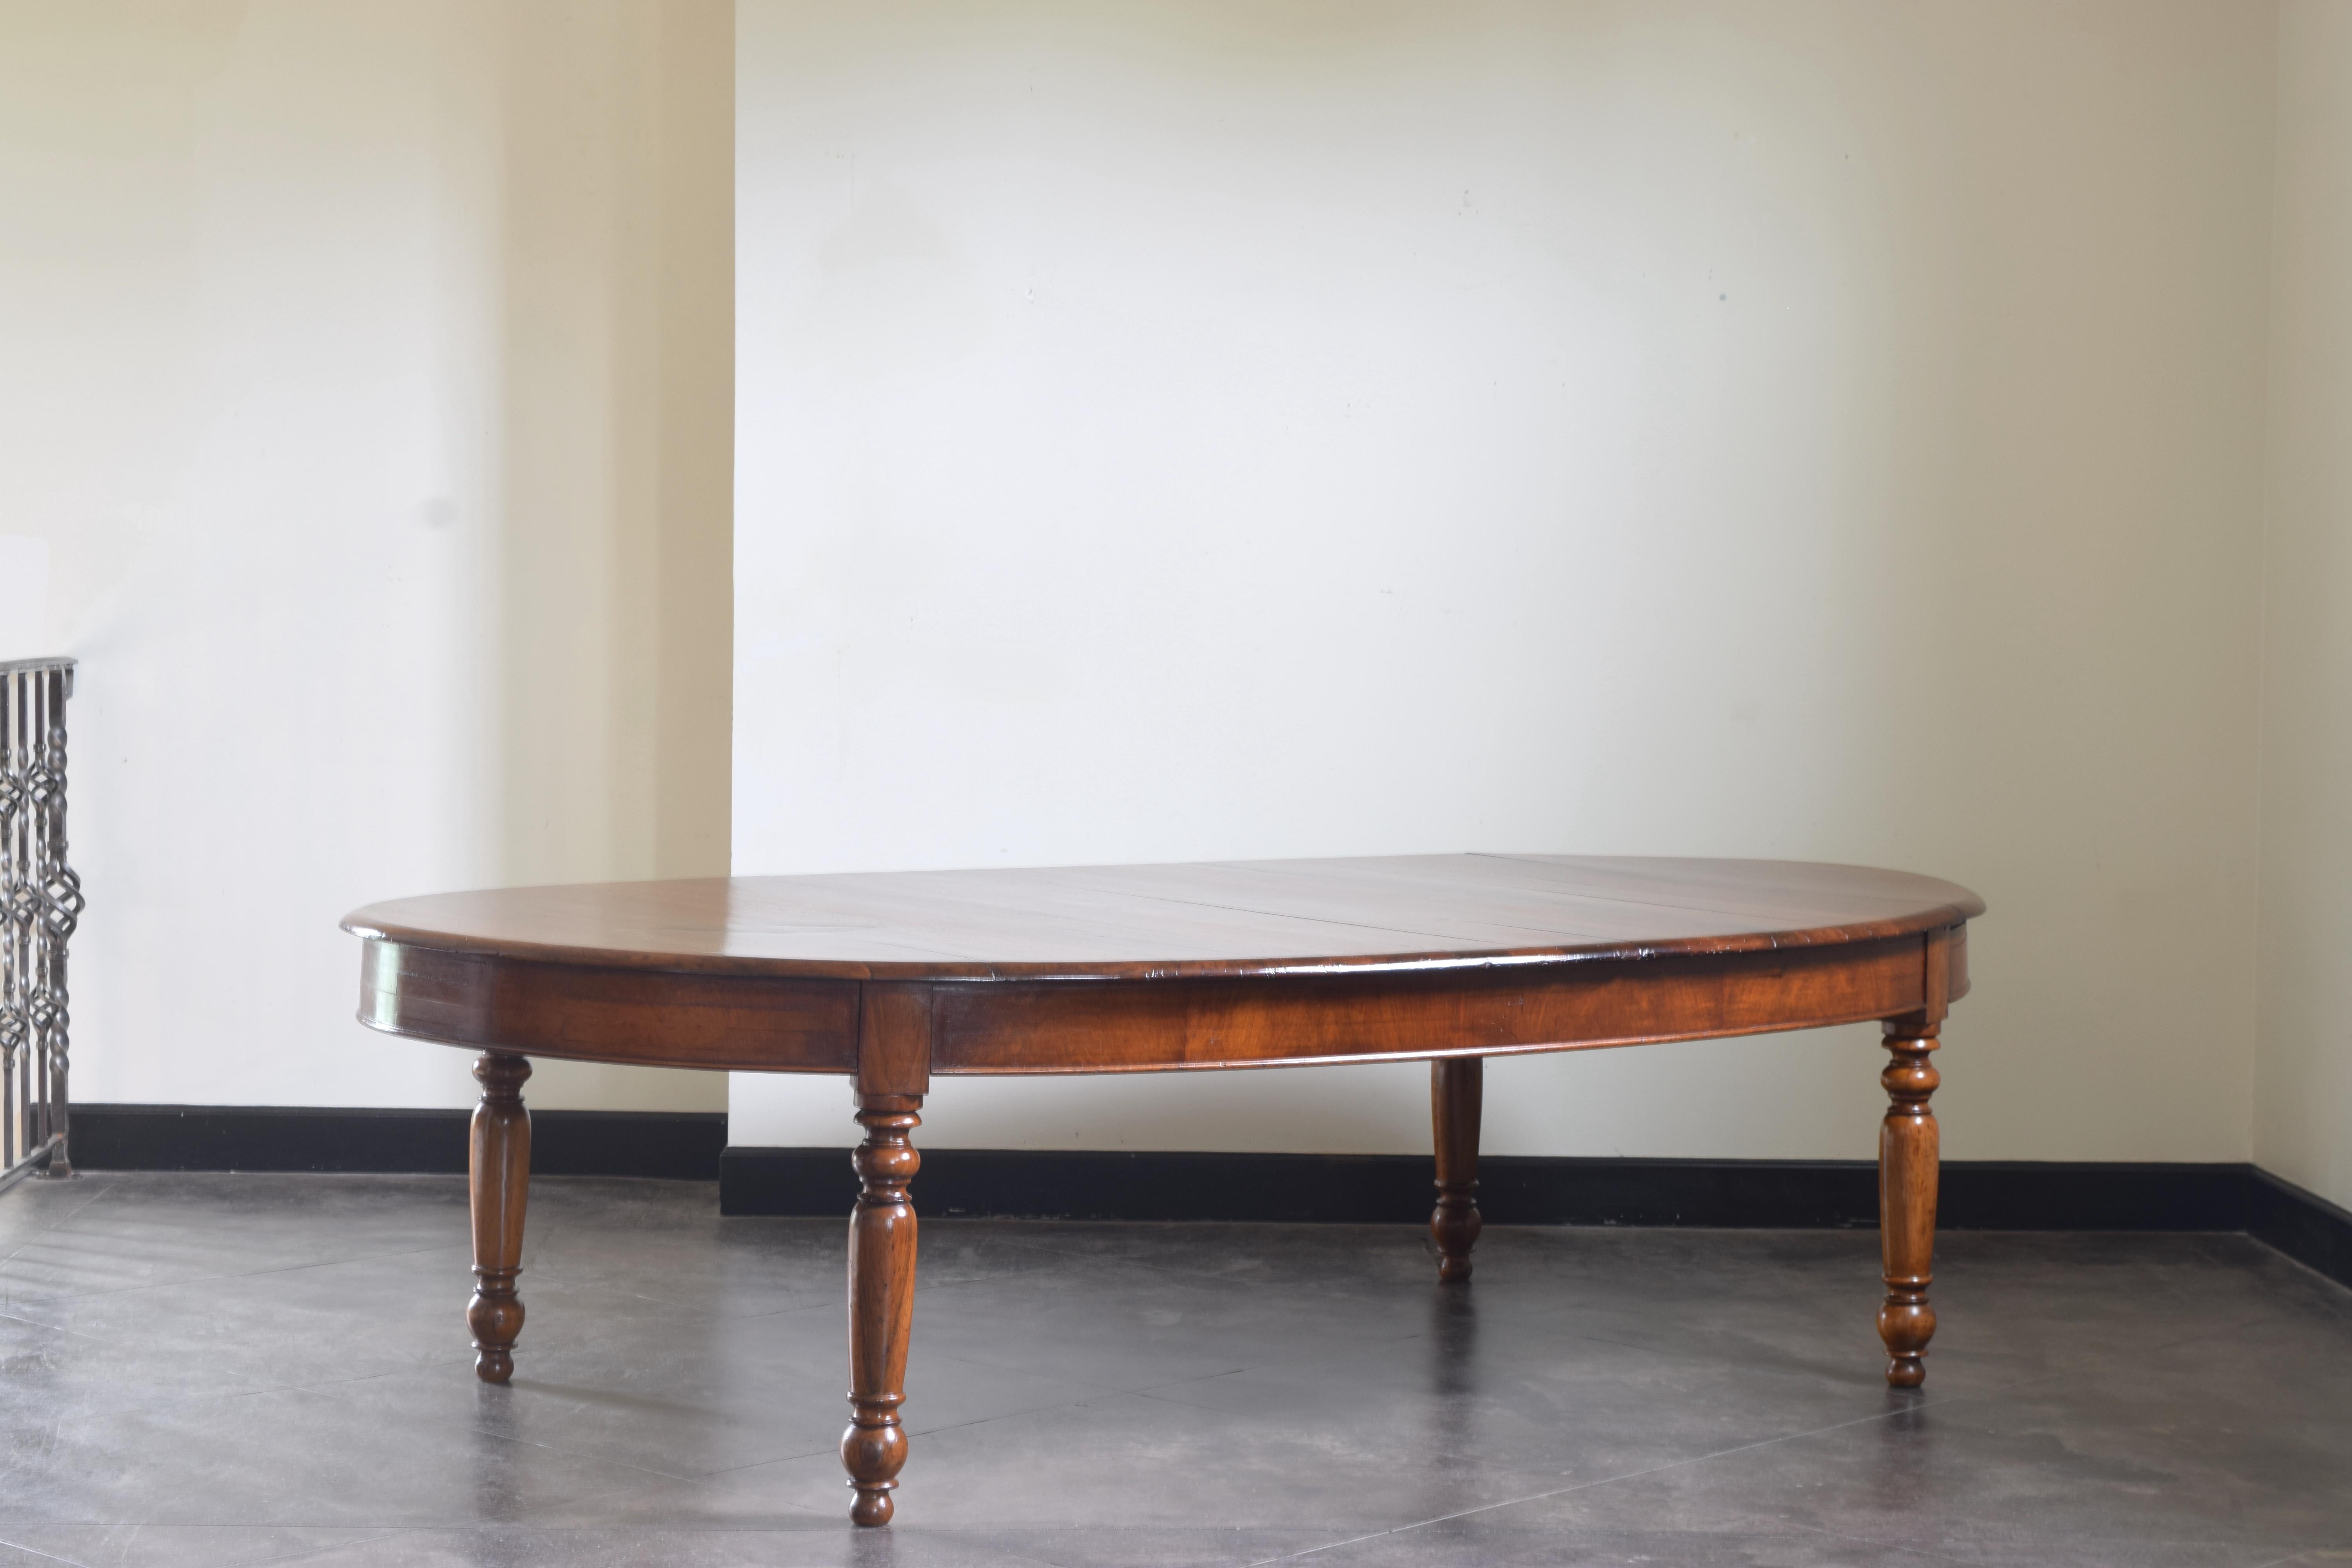 The oval top having a rounded edge atop an apron with lower molded edge, raised on removable elaborately turned and solid walnut legs, seats 8 comfortably with large chairs.